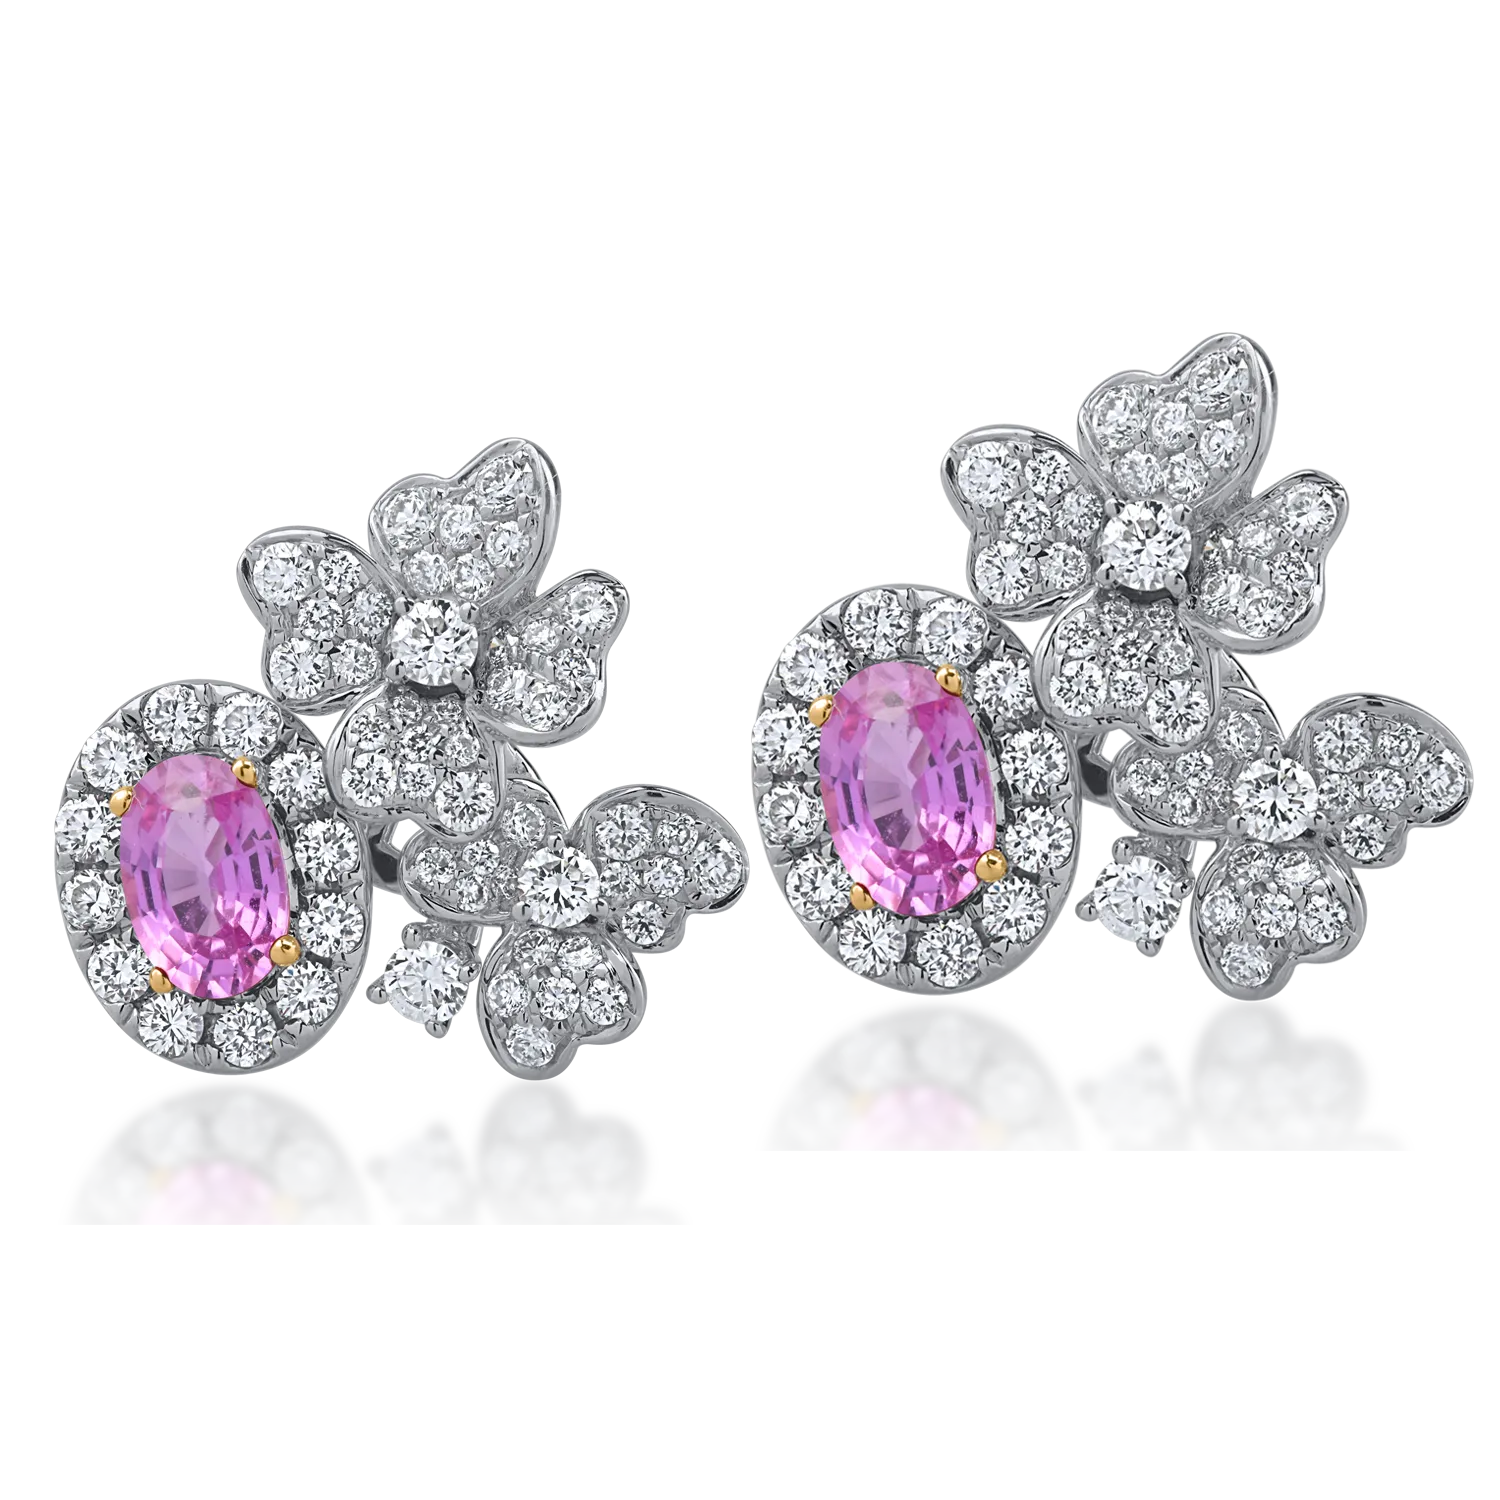 White gold earrings with 1.3ct diamonds and 1.19ct pink sapphires